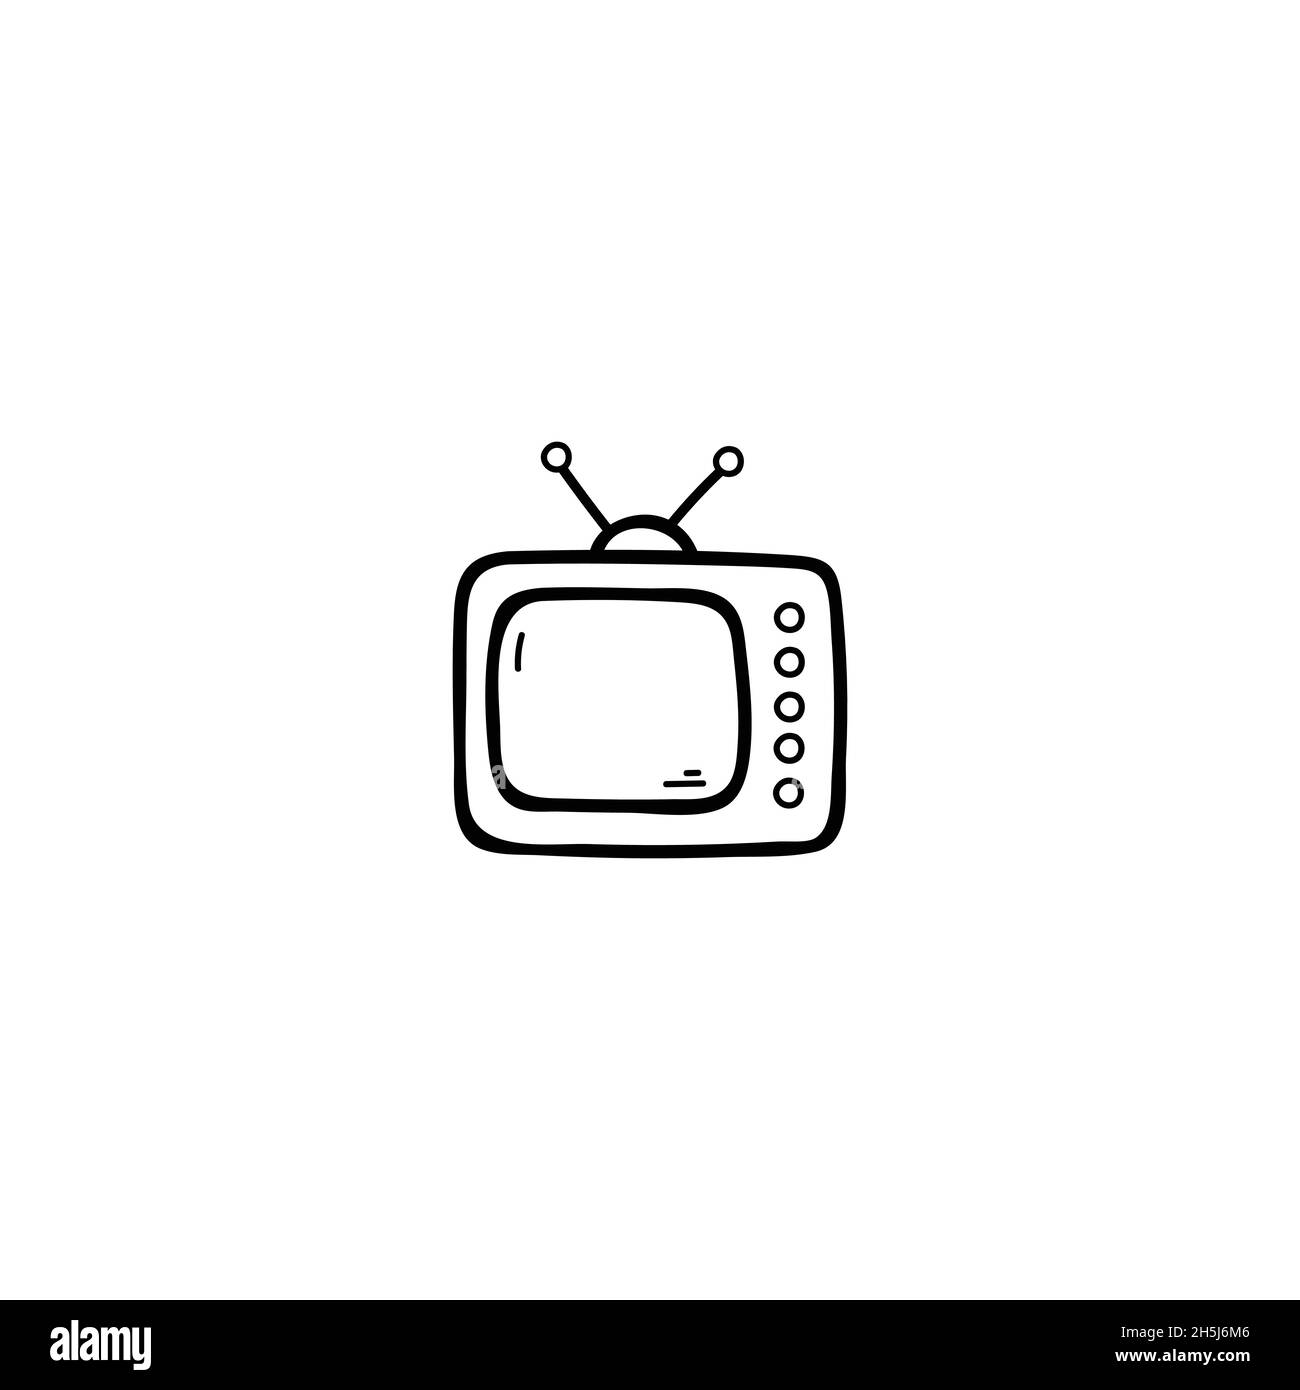 Hand Drawn television doodle illustration icon. Outline hand drawn tv vector icon illustrations isolated on white background. Stock Vector